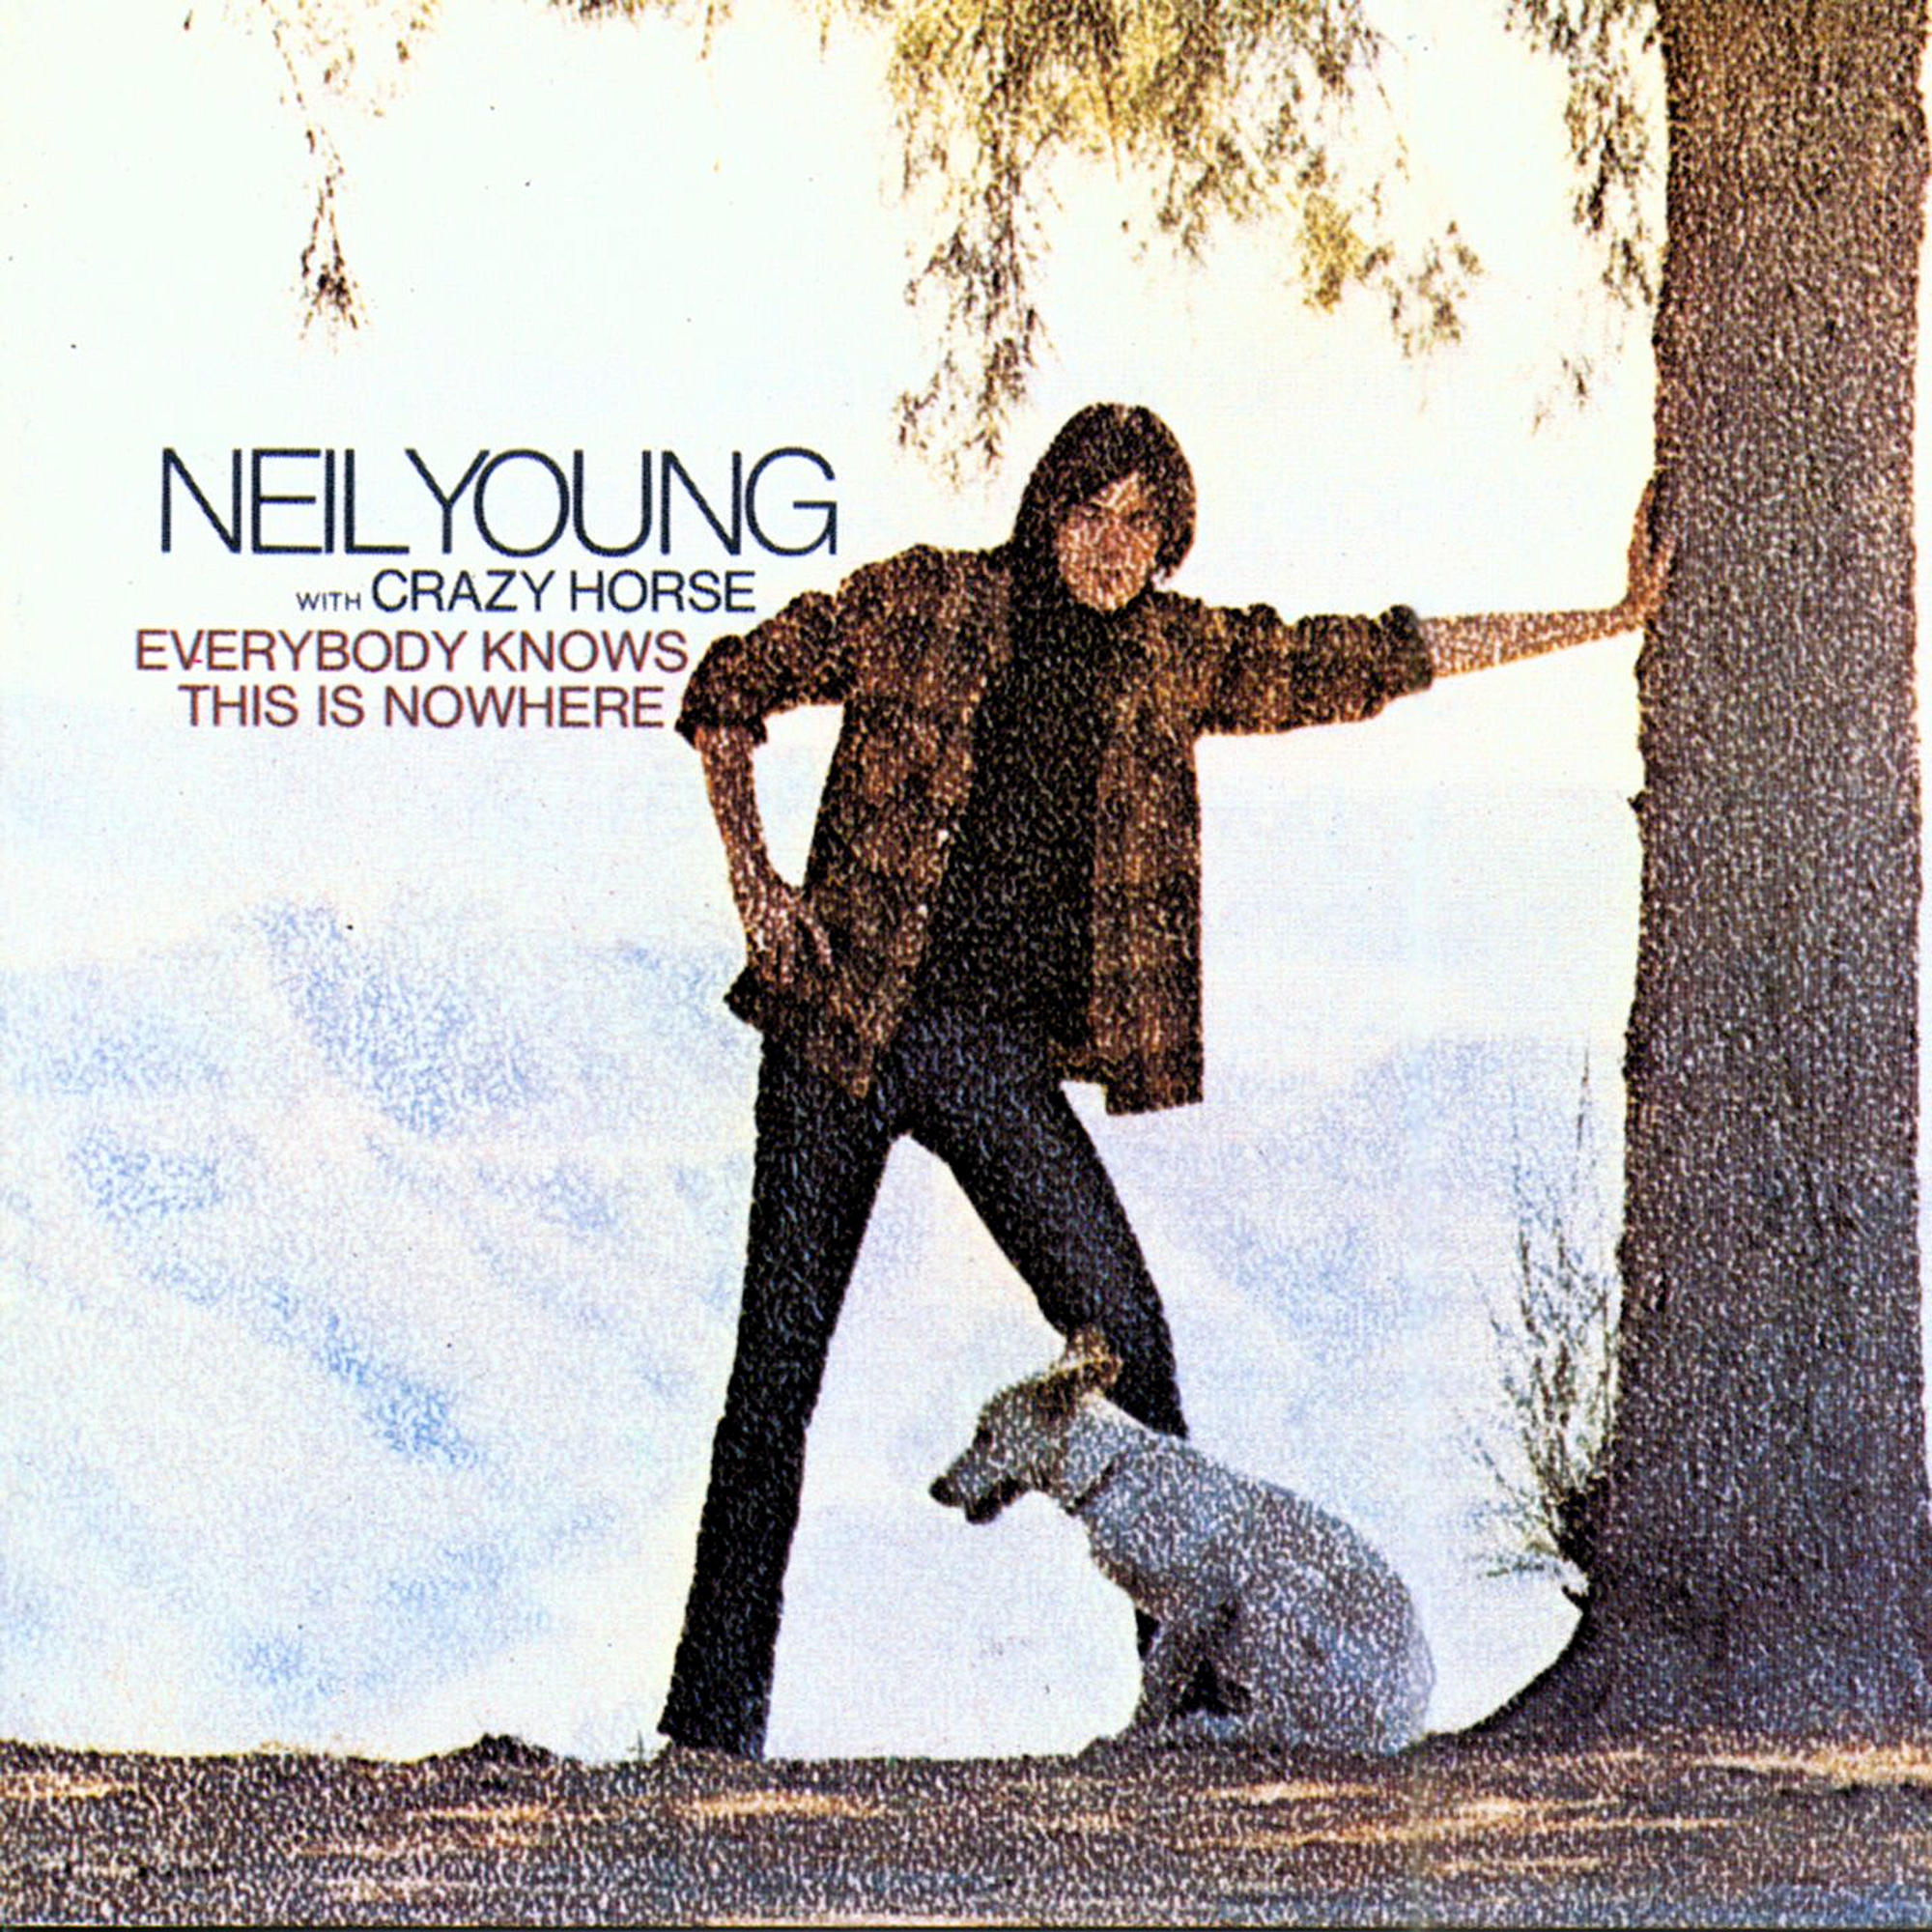 Neil Young Knows (Vinyl) Nowhere - Is This - Everybody